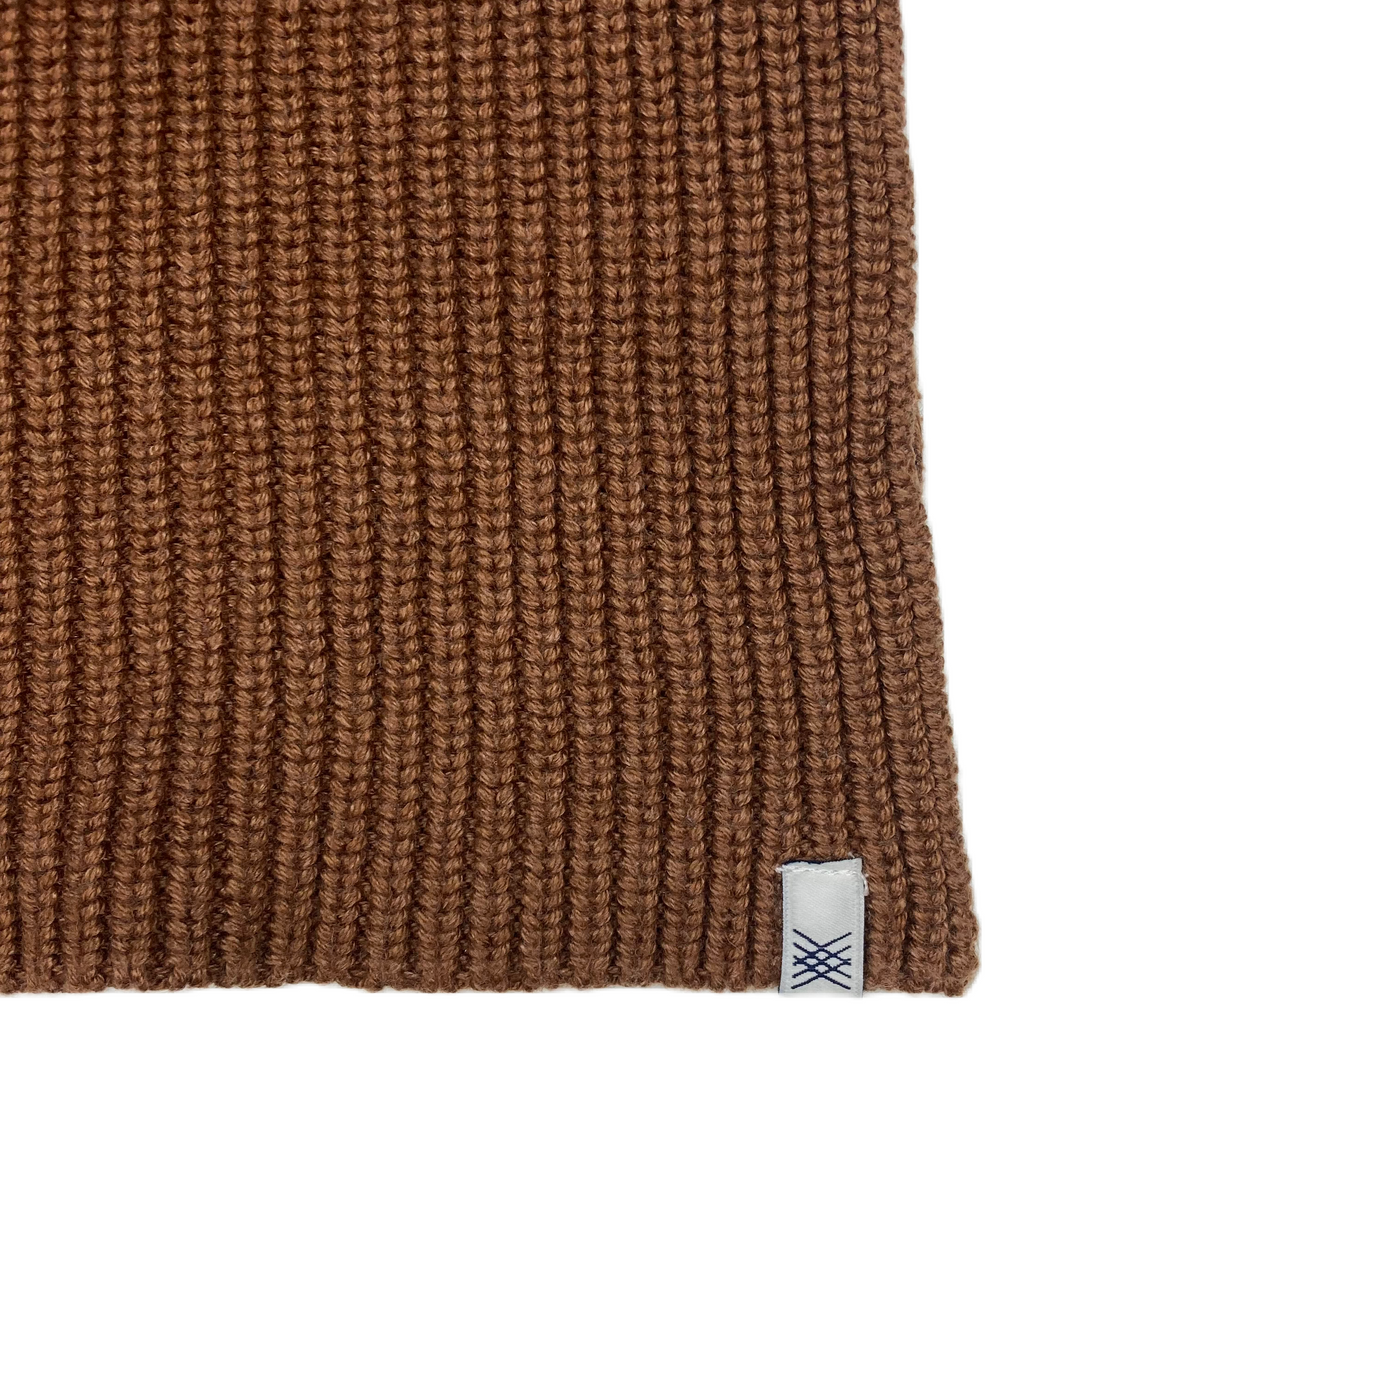 Repose Ams. - Knitted collar brown 4y